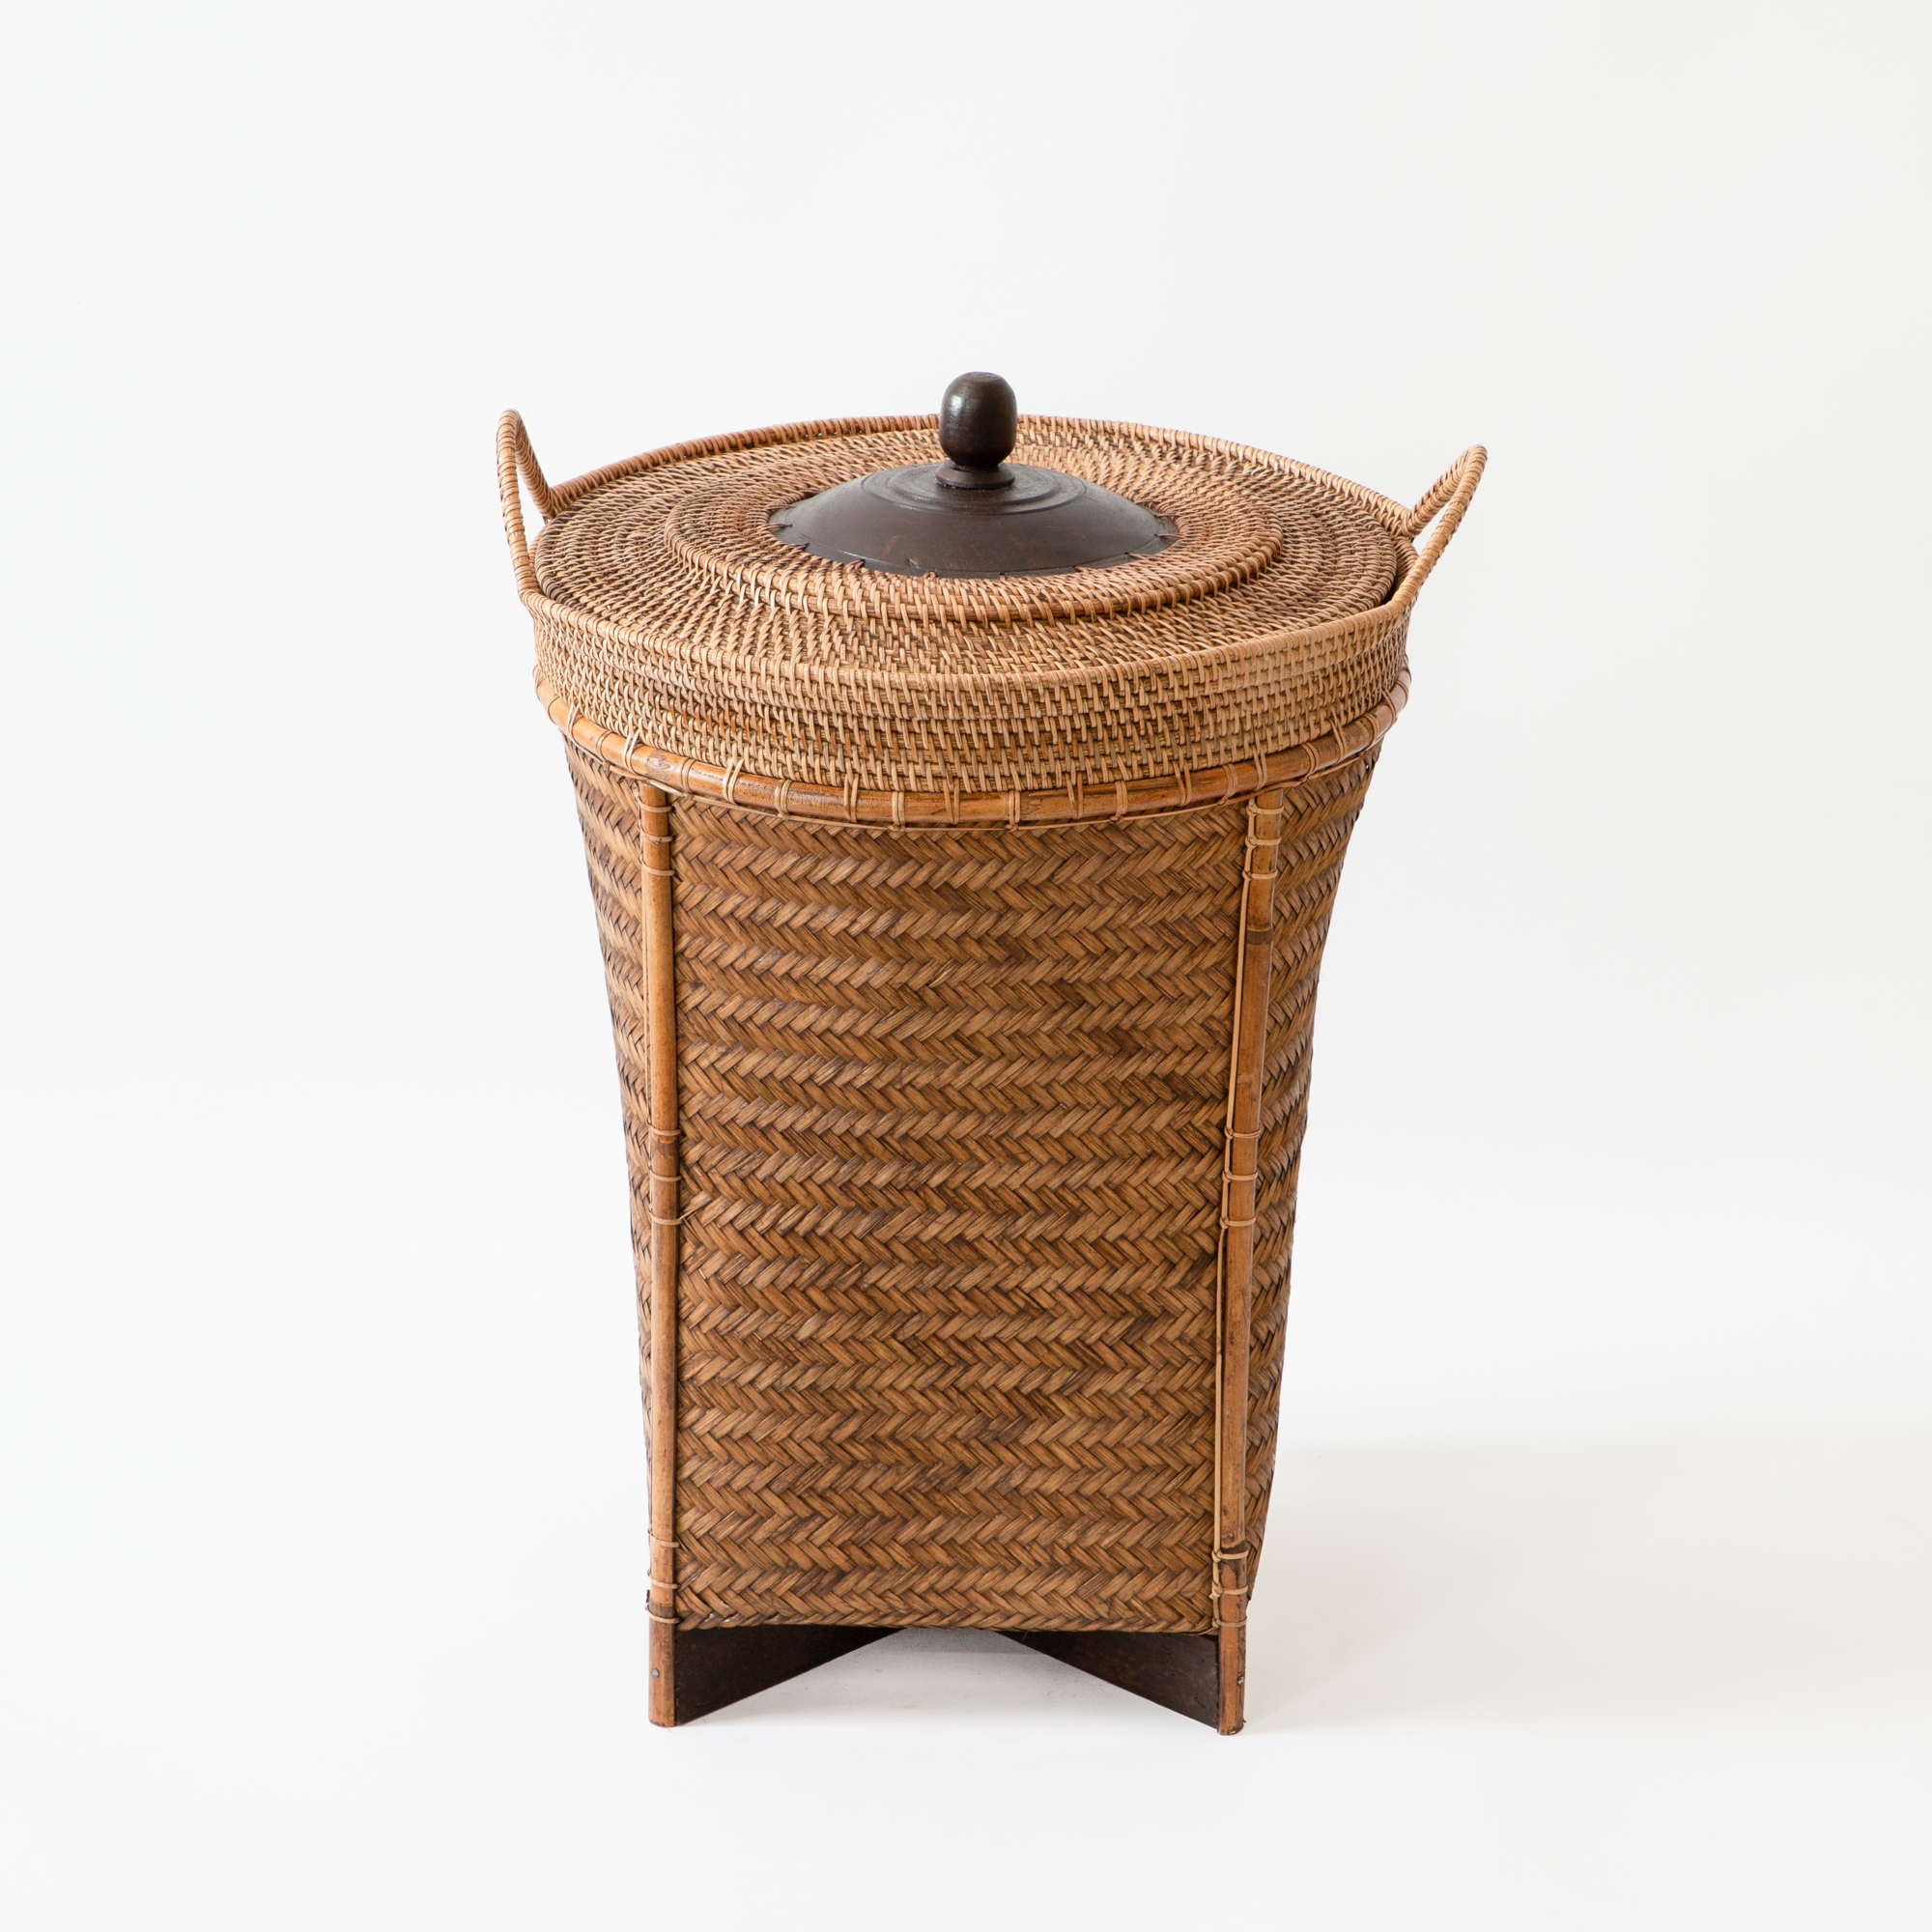 Square Bottomed Borneo Storage Basket with Lid and Knob